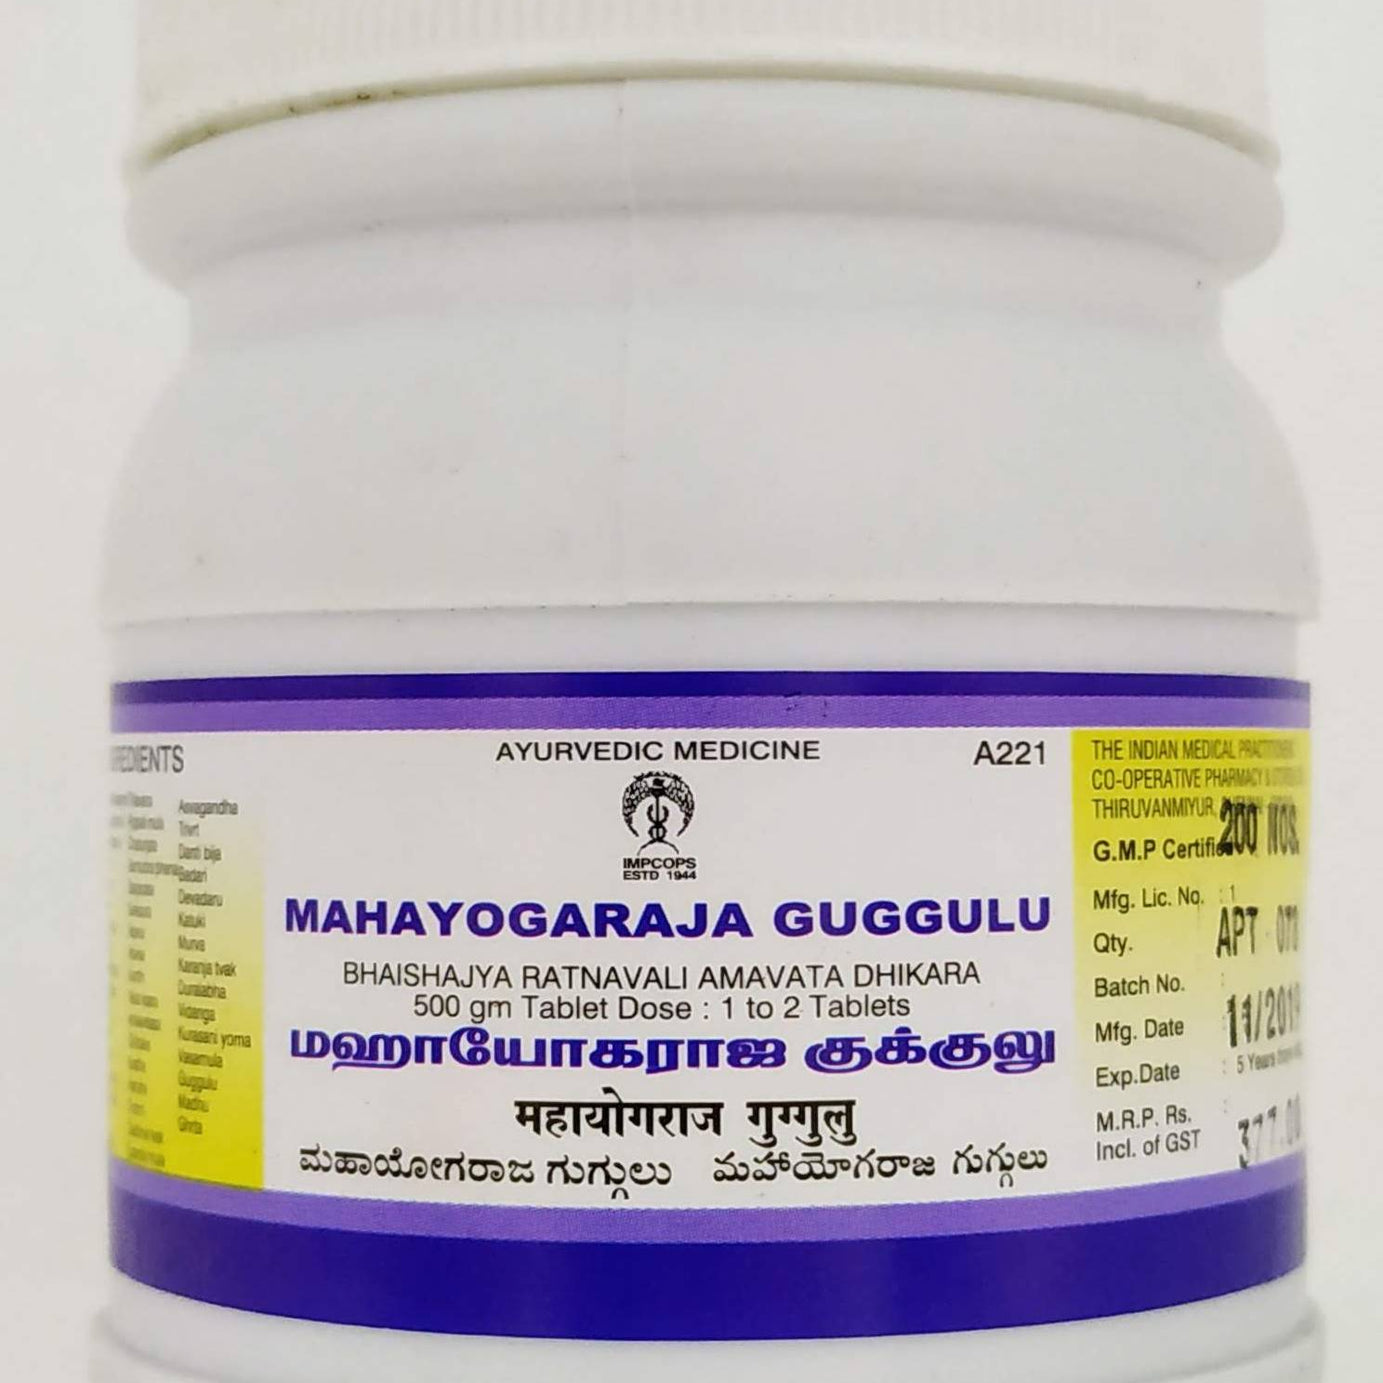 Shop Mahayogaraja guggulu Tablets - 200Tablets at price 528.00 from Impcops Online - Ayush Care